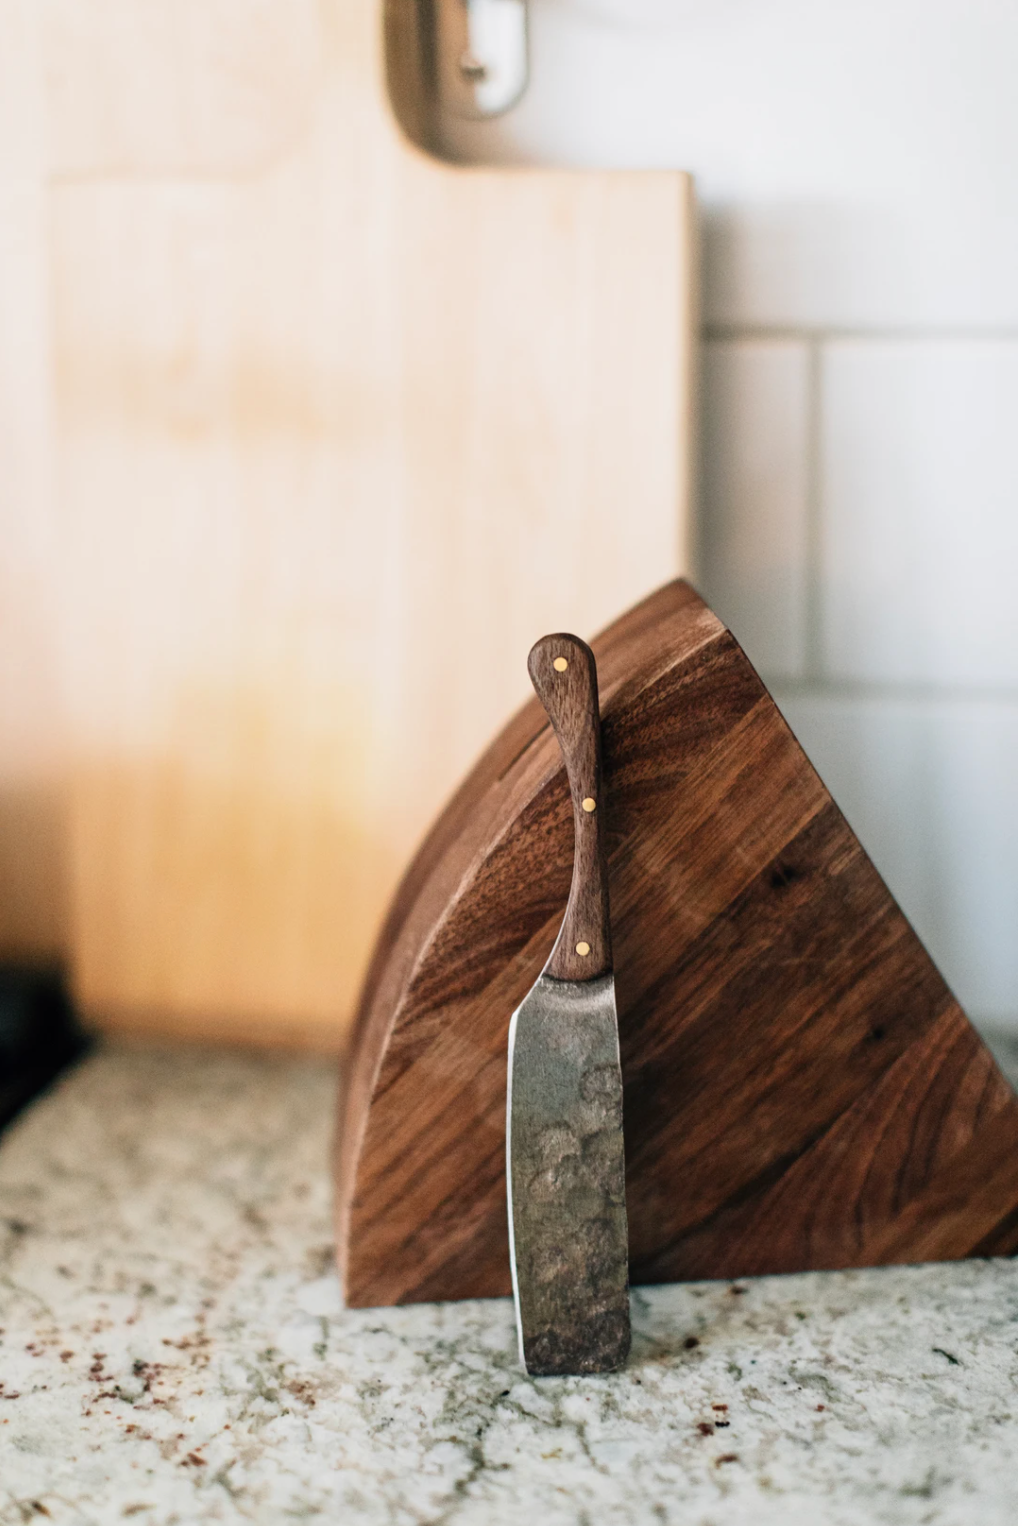 Handcrafted cheese block with hand forged stainless steel knife on a kitchen countertop